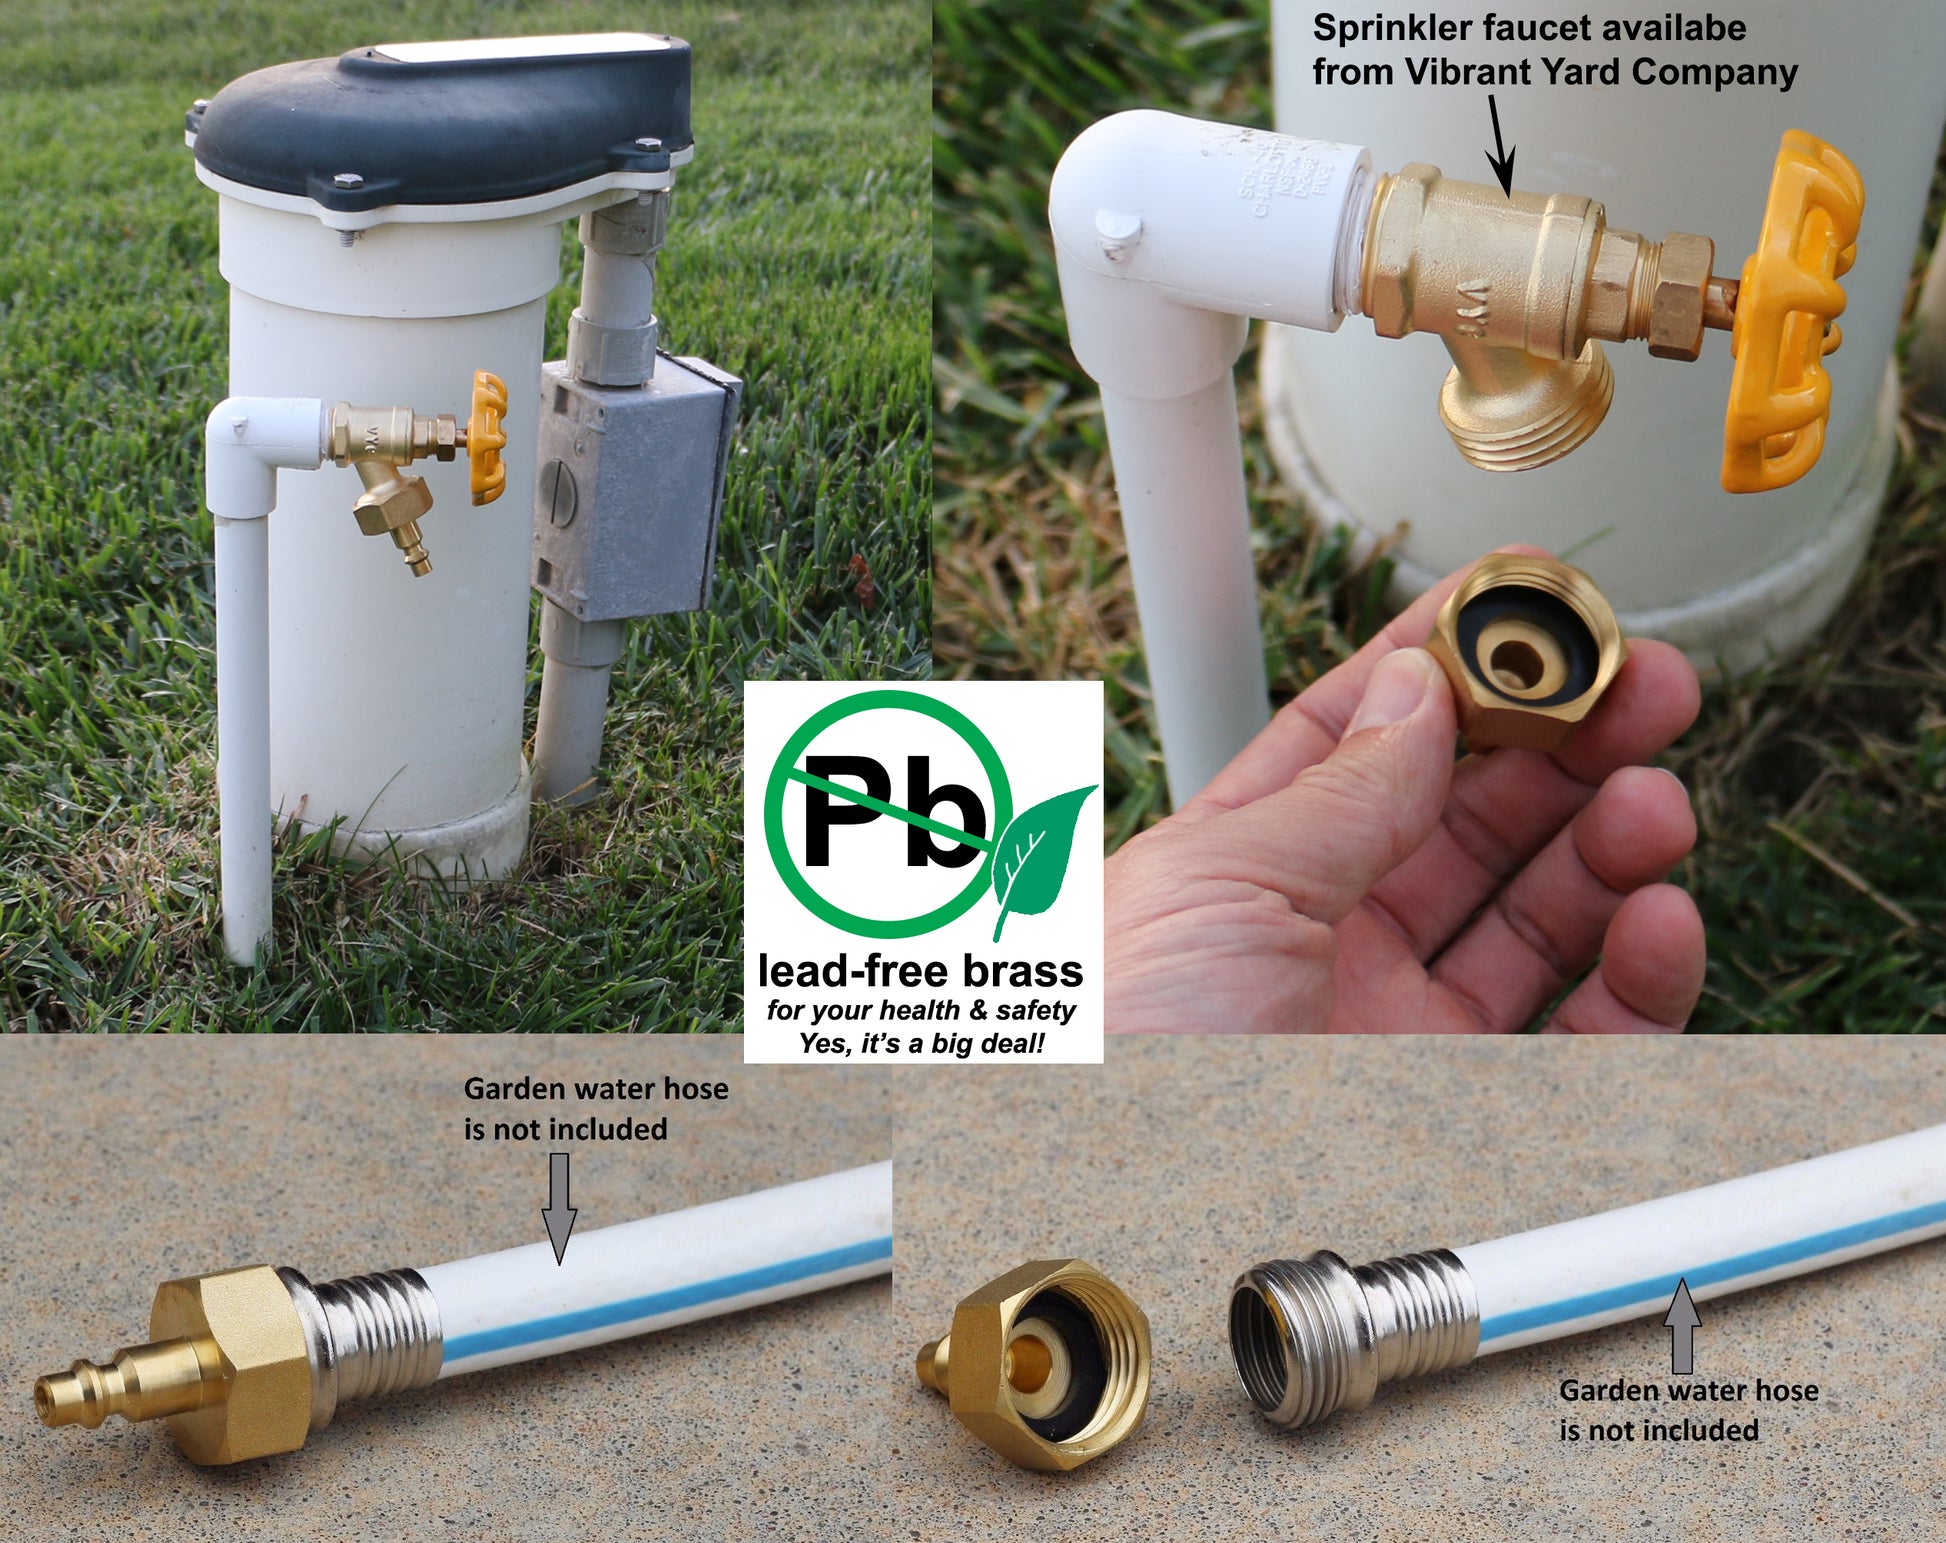 How To Blow Out RV Water Lines Using An Air Compressor